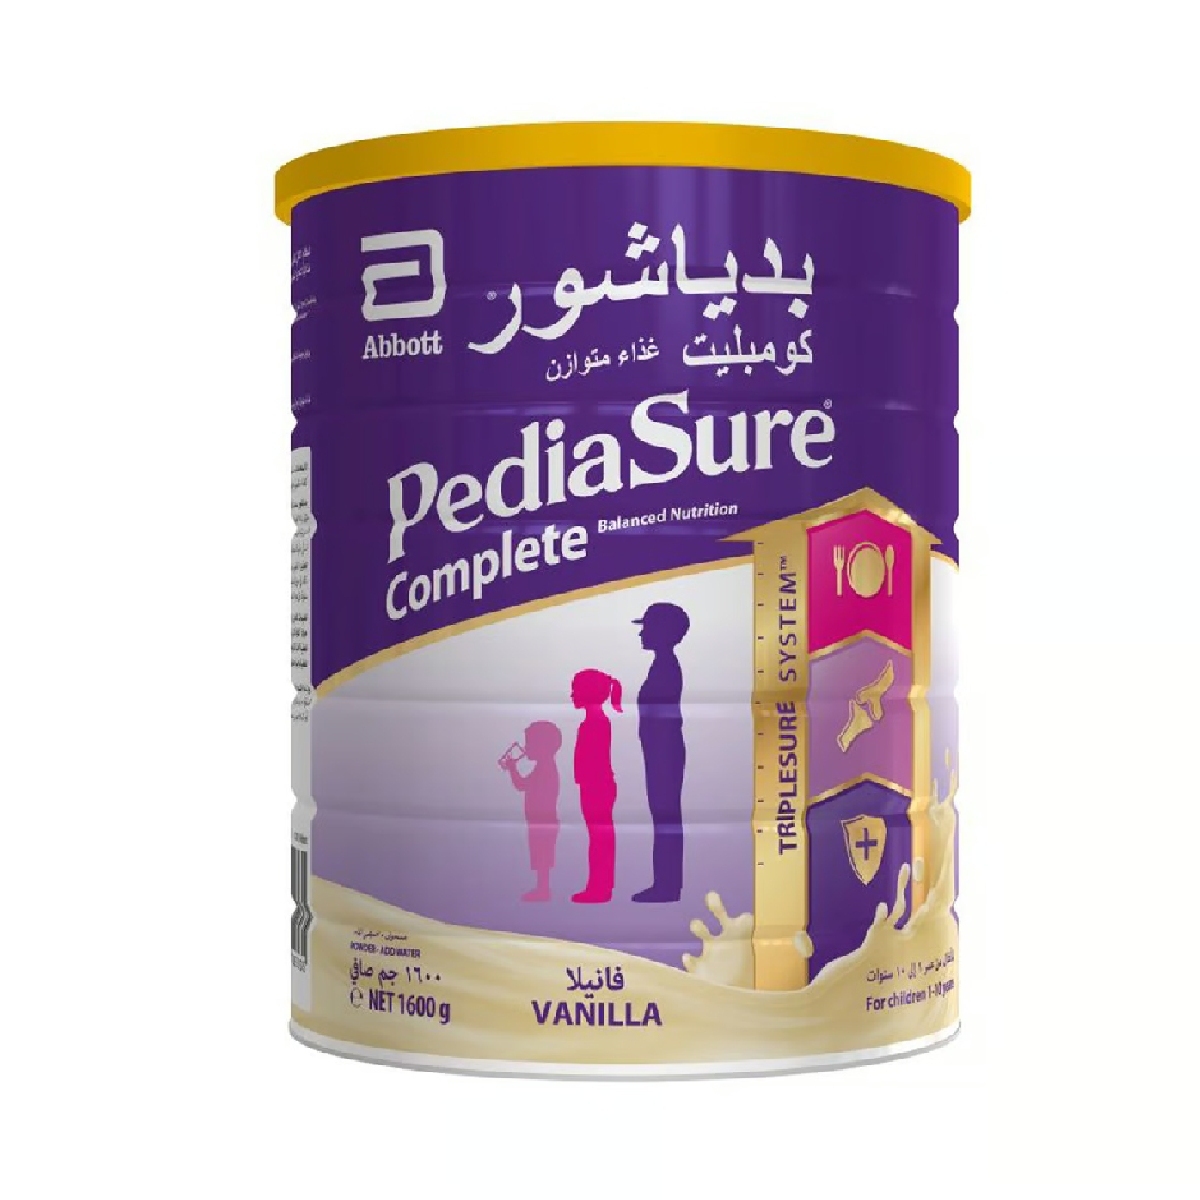 Pediasure Triplesure Complete Balanced Nutrition Vanilla Flavour From 1-10 Years 1.6 kg + 400 g